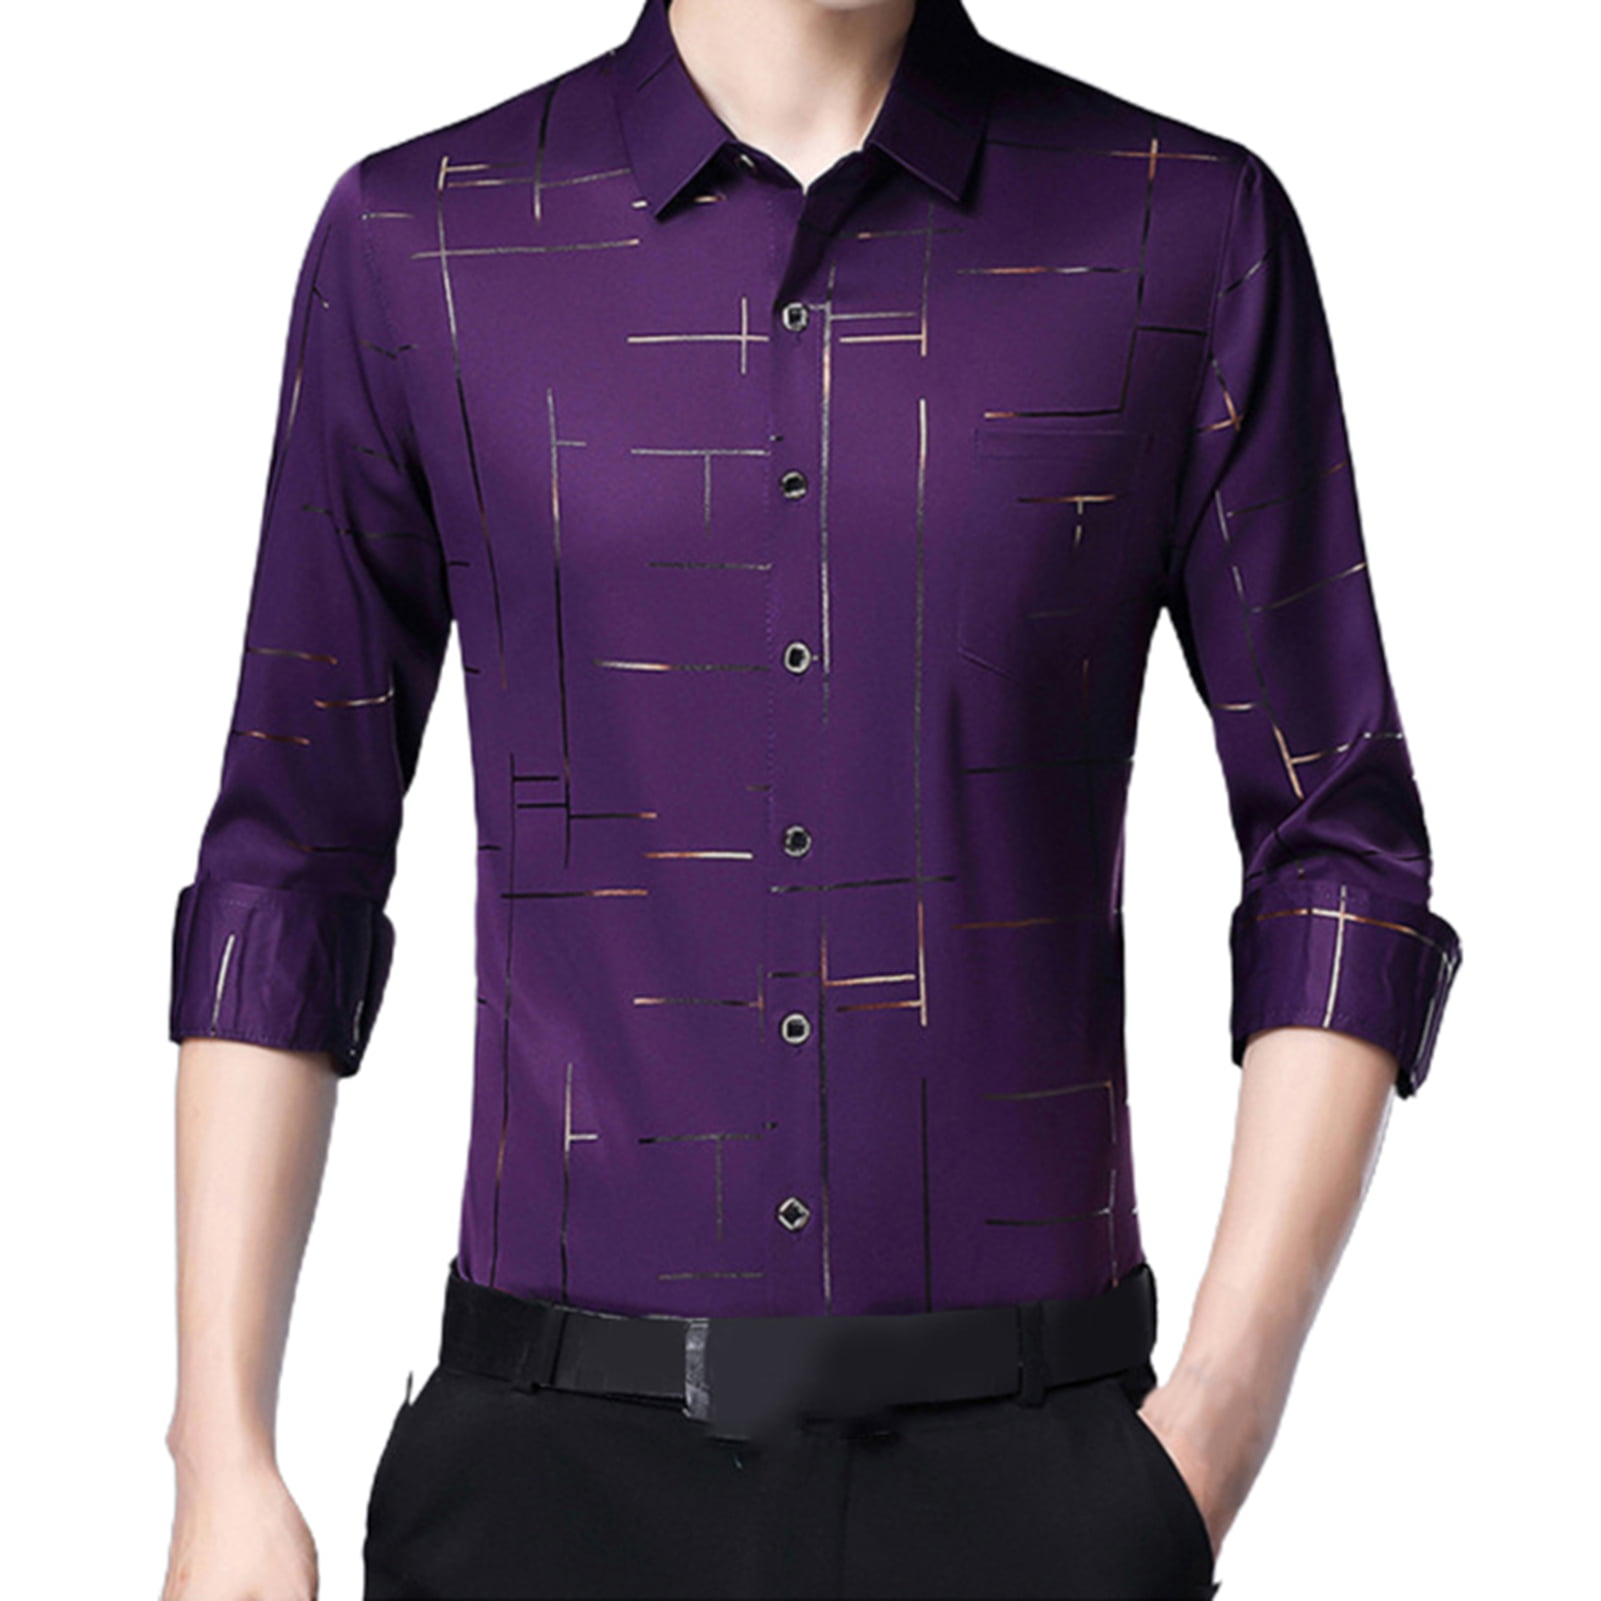 Mstyle Mens Casual Retro Splicing Chinese Style Short Sleeve Button Down Blouse Shirt Tops